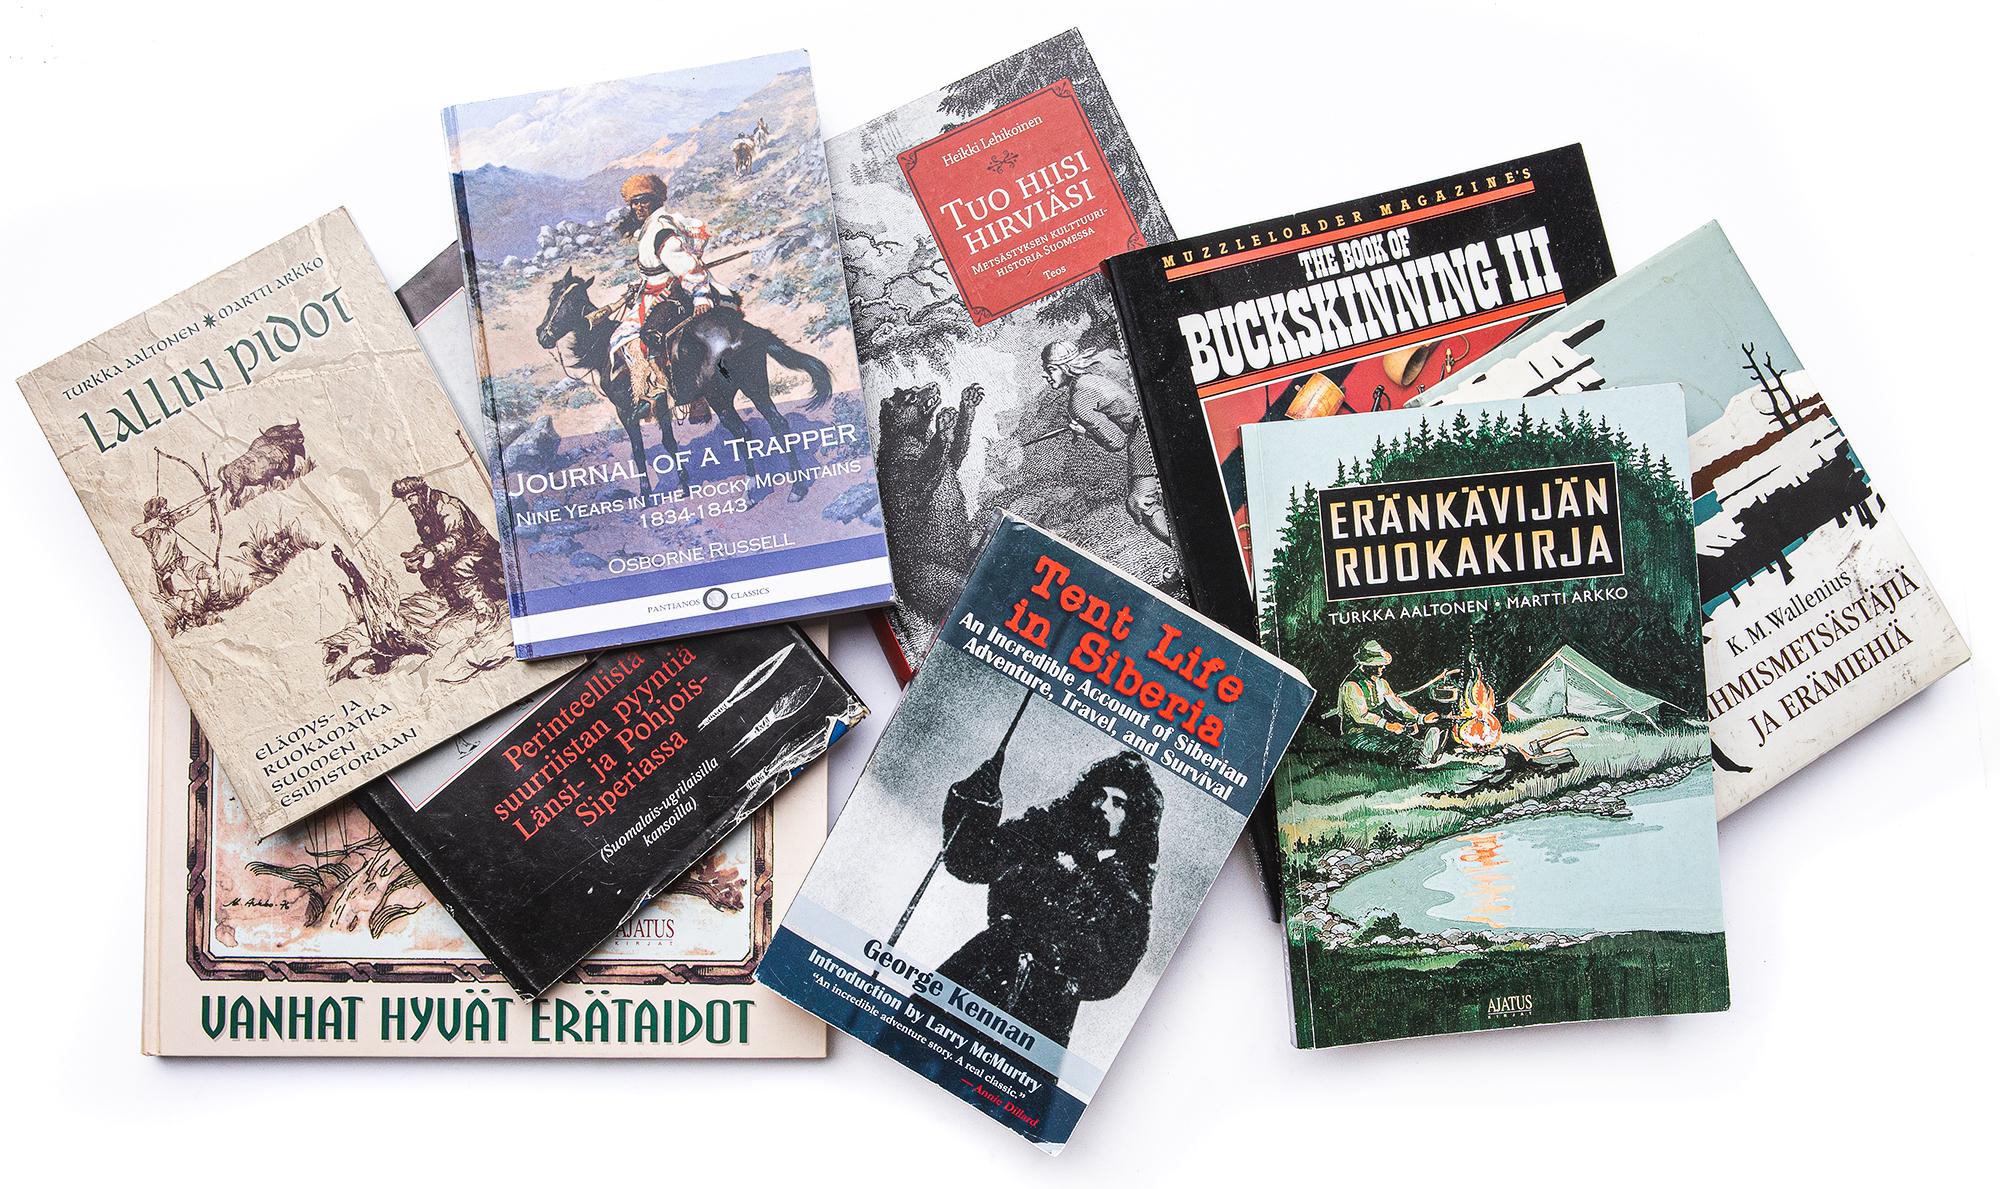 A pile of bushcraft books in English and Finnish